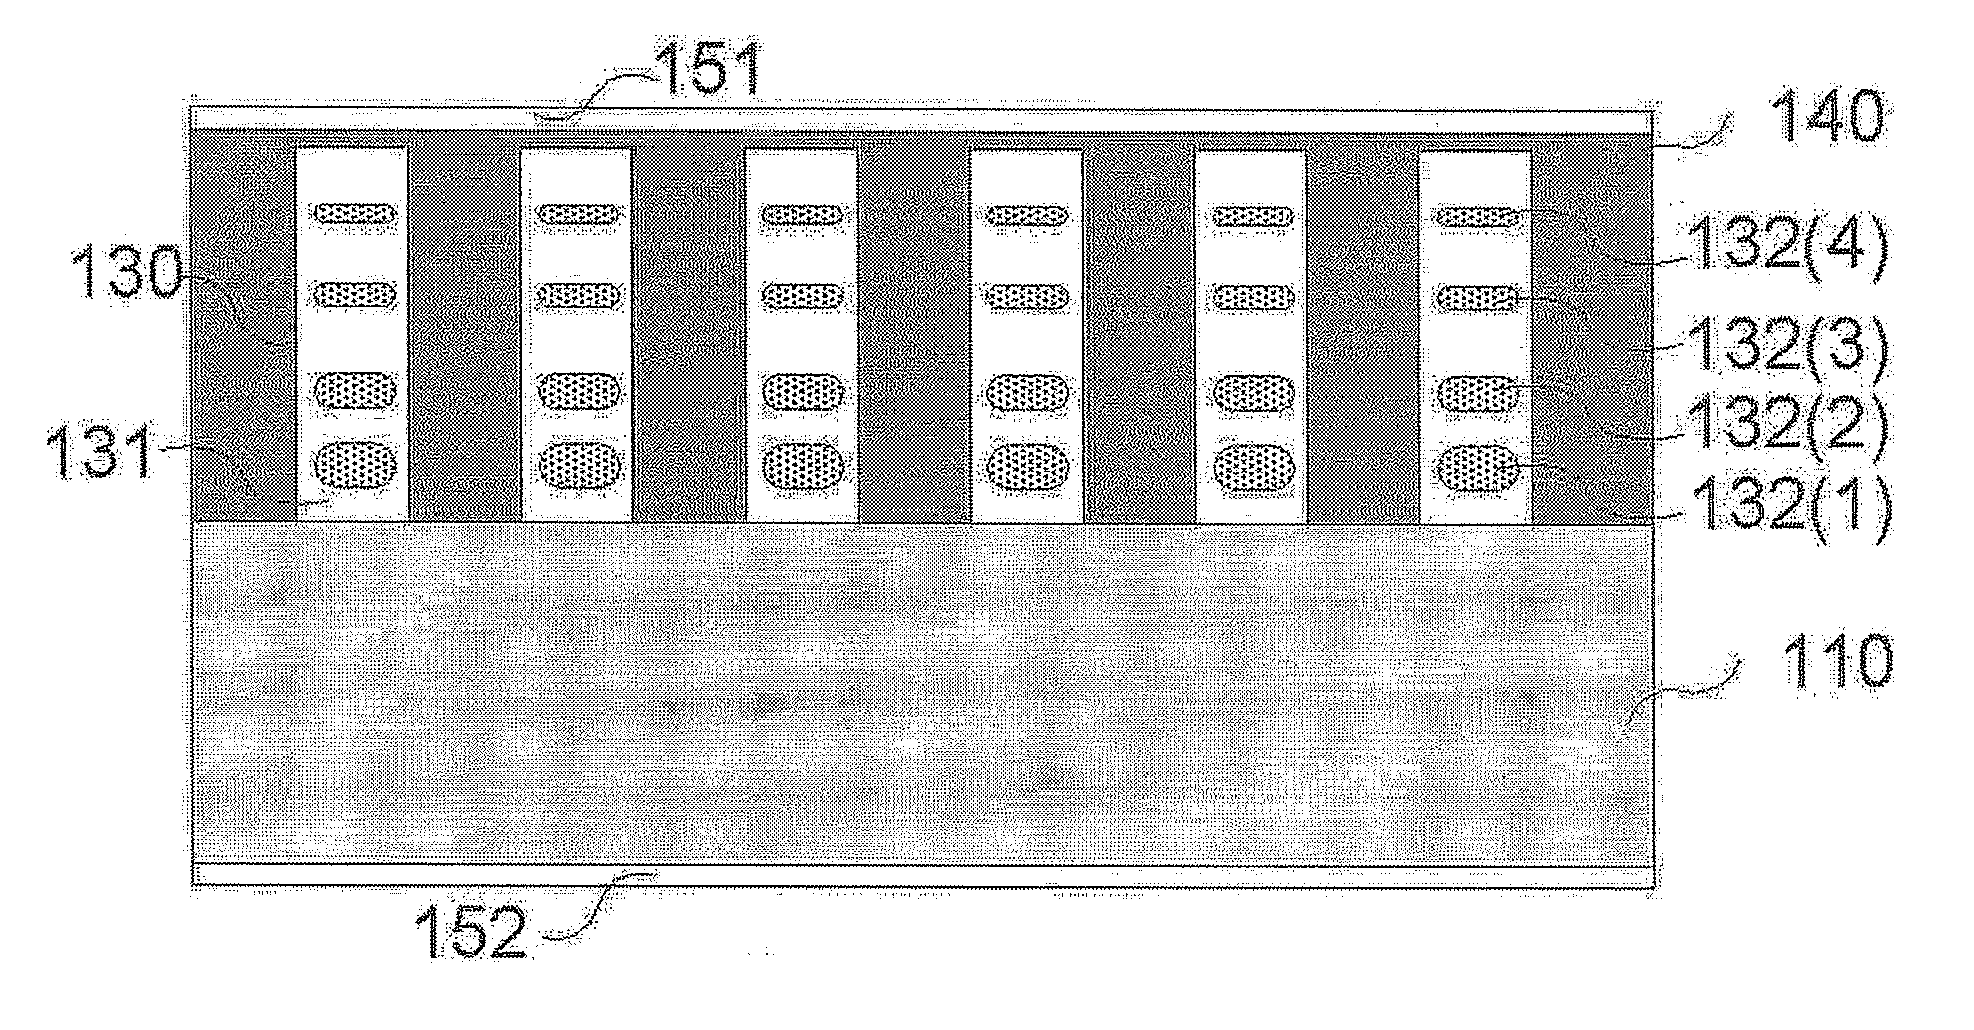 Solar Cell Having Quantum Dot Nanowire Array and the Fabrication Method Thereof